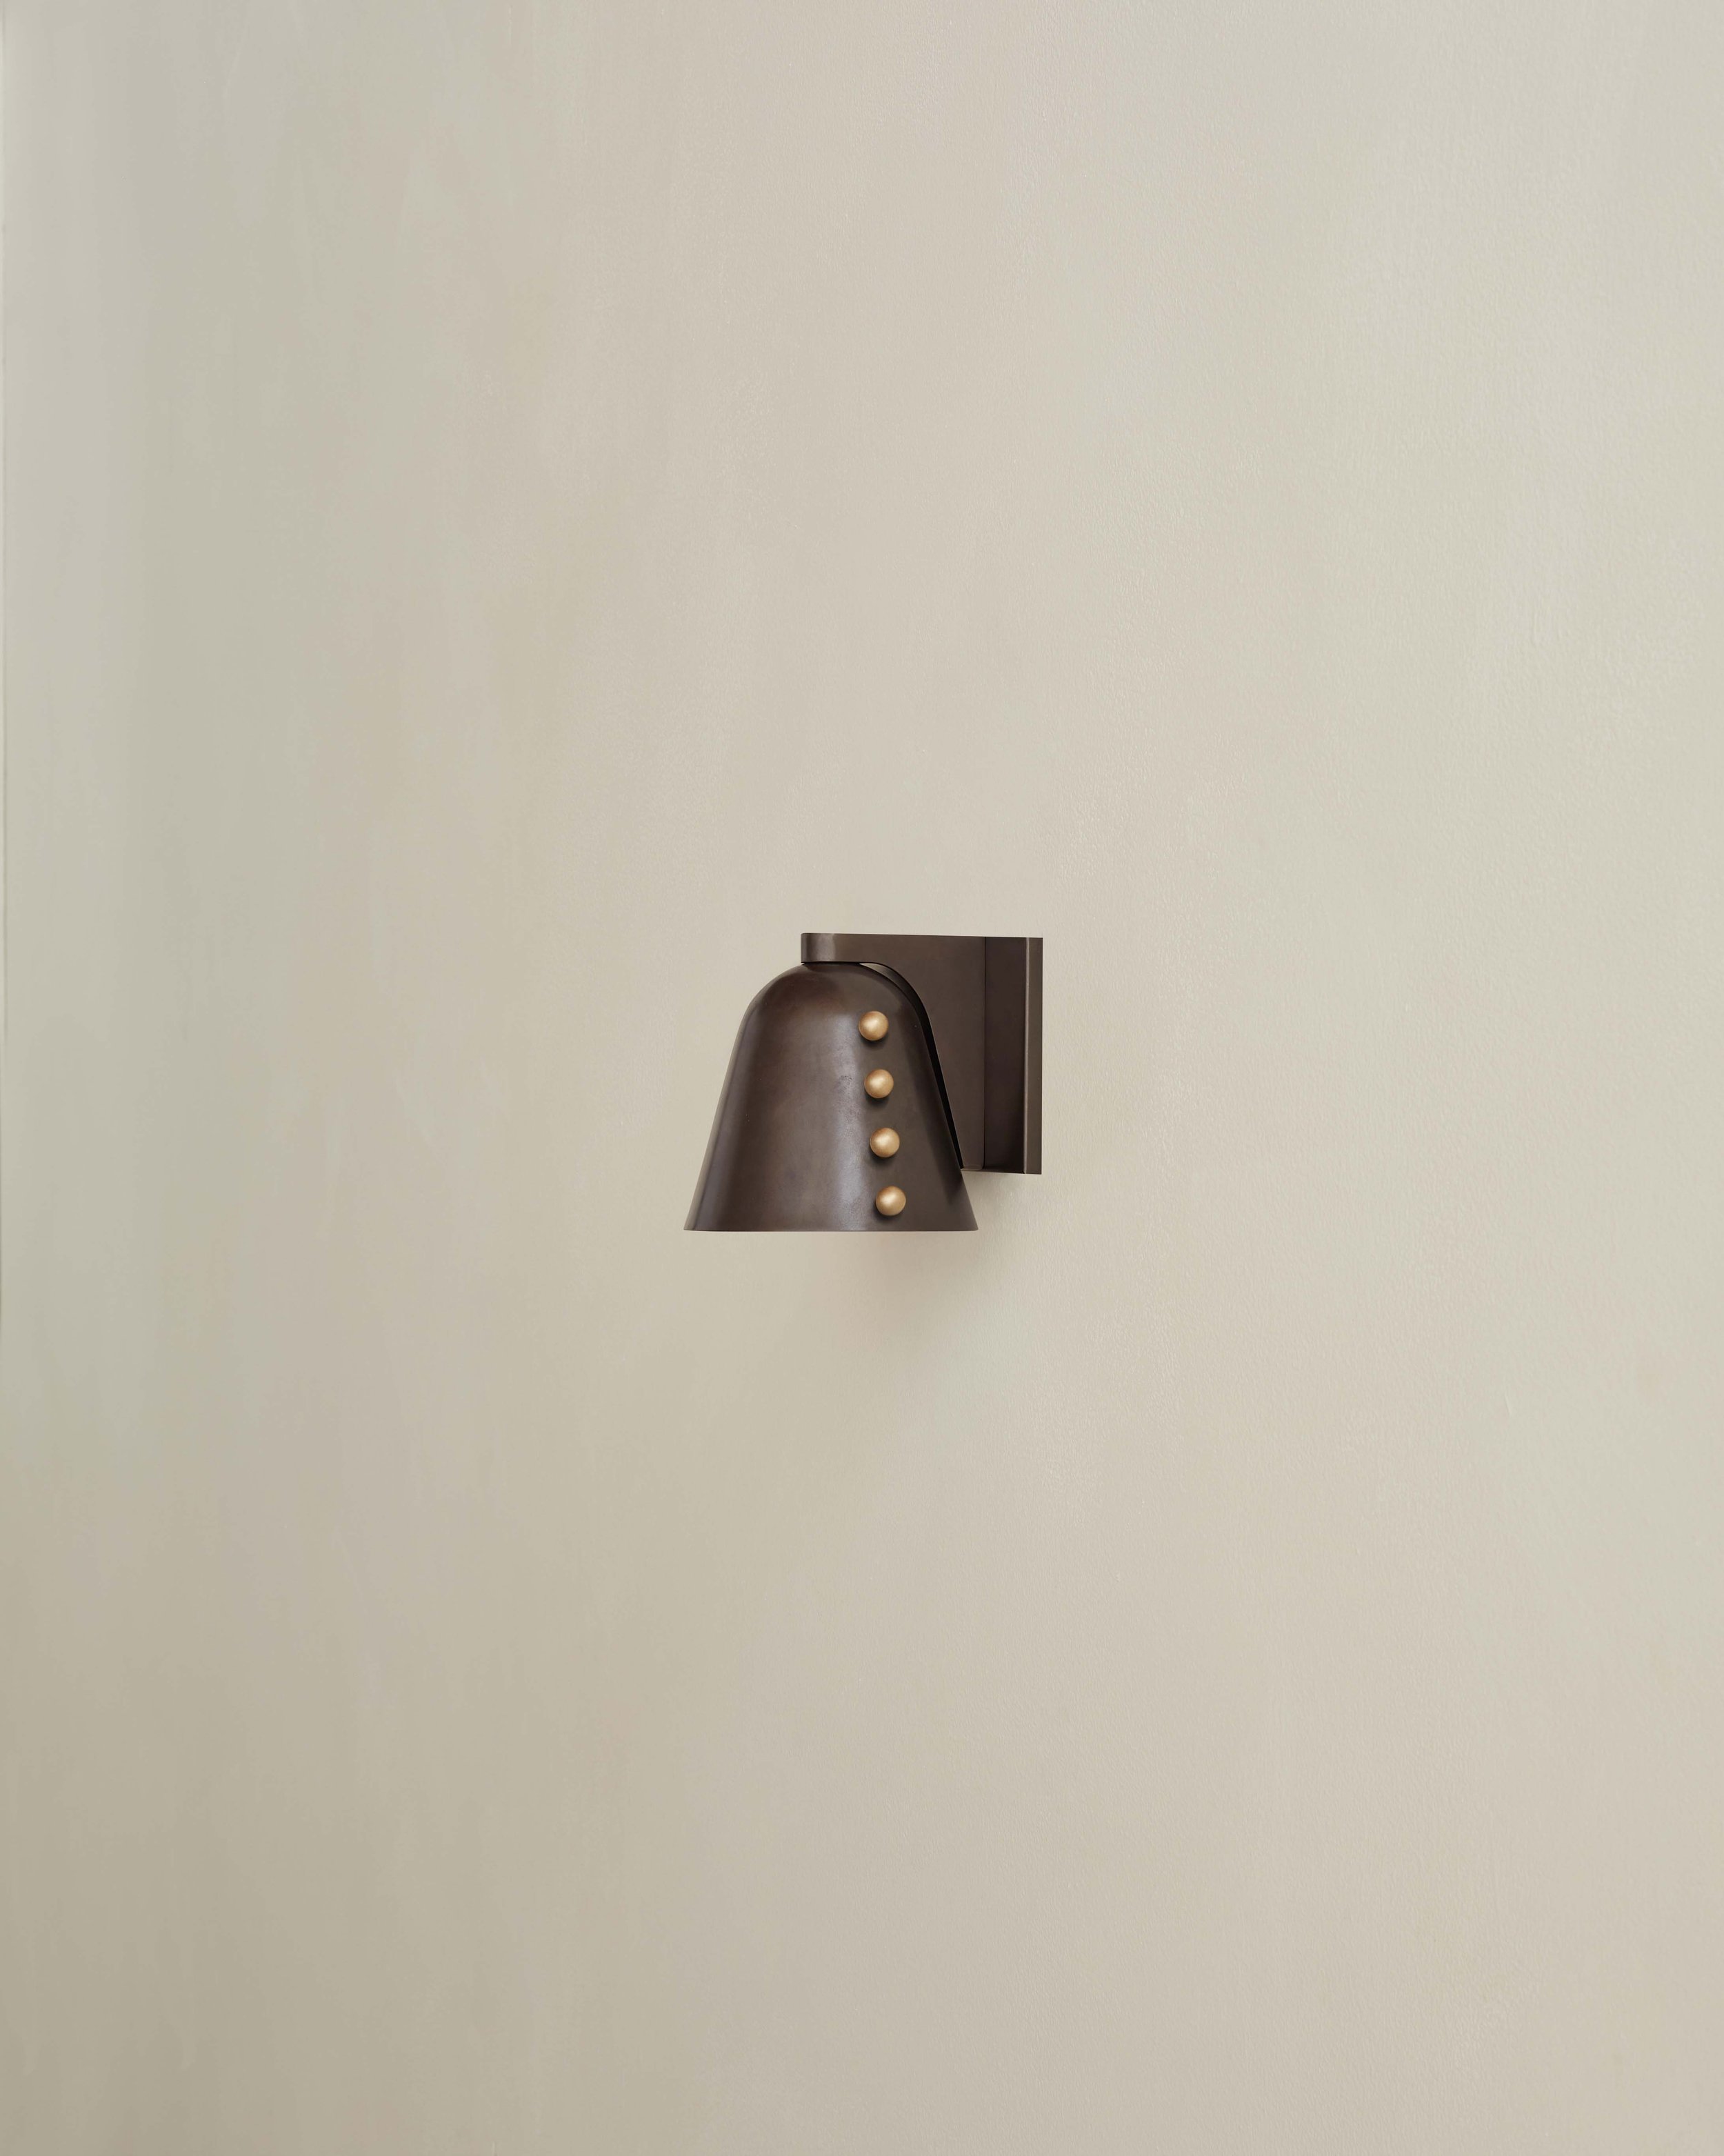 INCOMMONWITH_SCONCE_GEMMA_WALL_SCONCE_SIDE_VIEW_DOWN_BLACKENED_BRASS_BRASS_DOTS.jpg